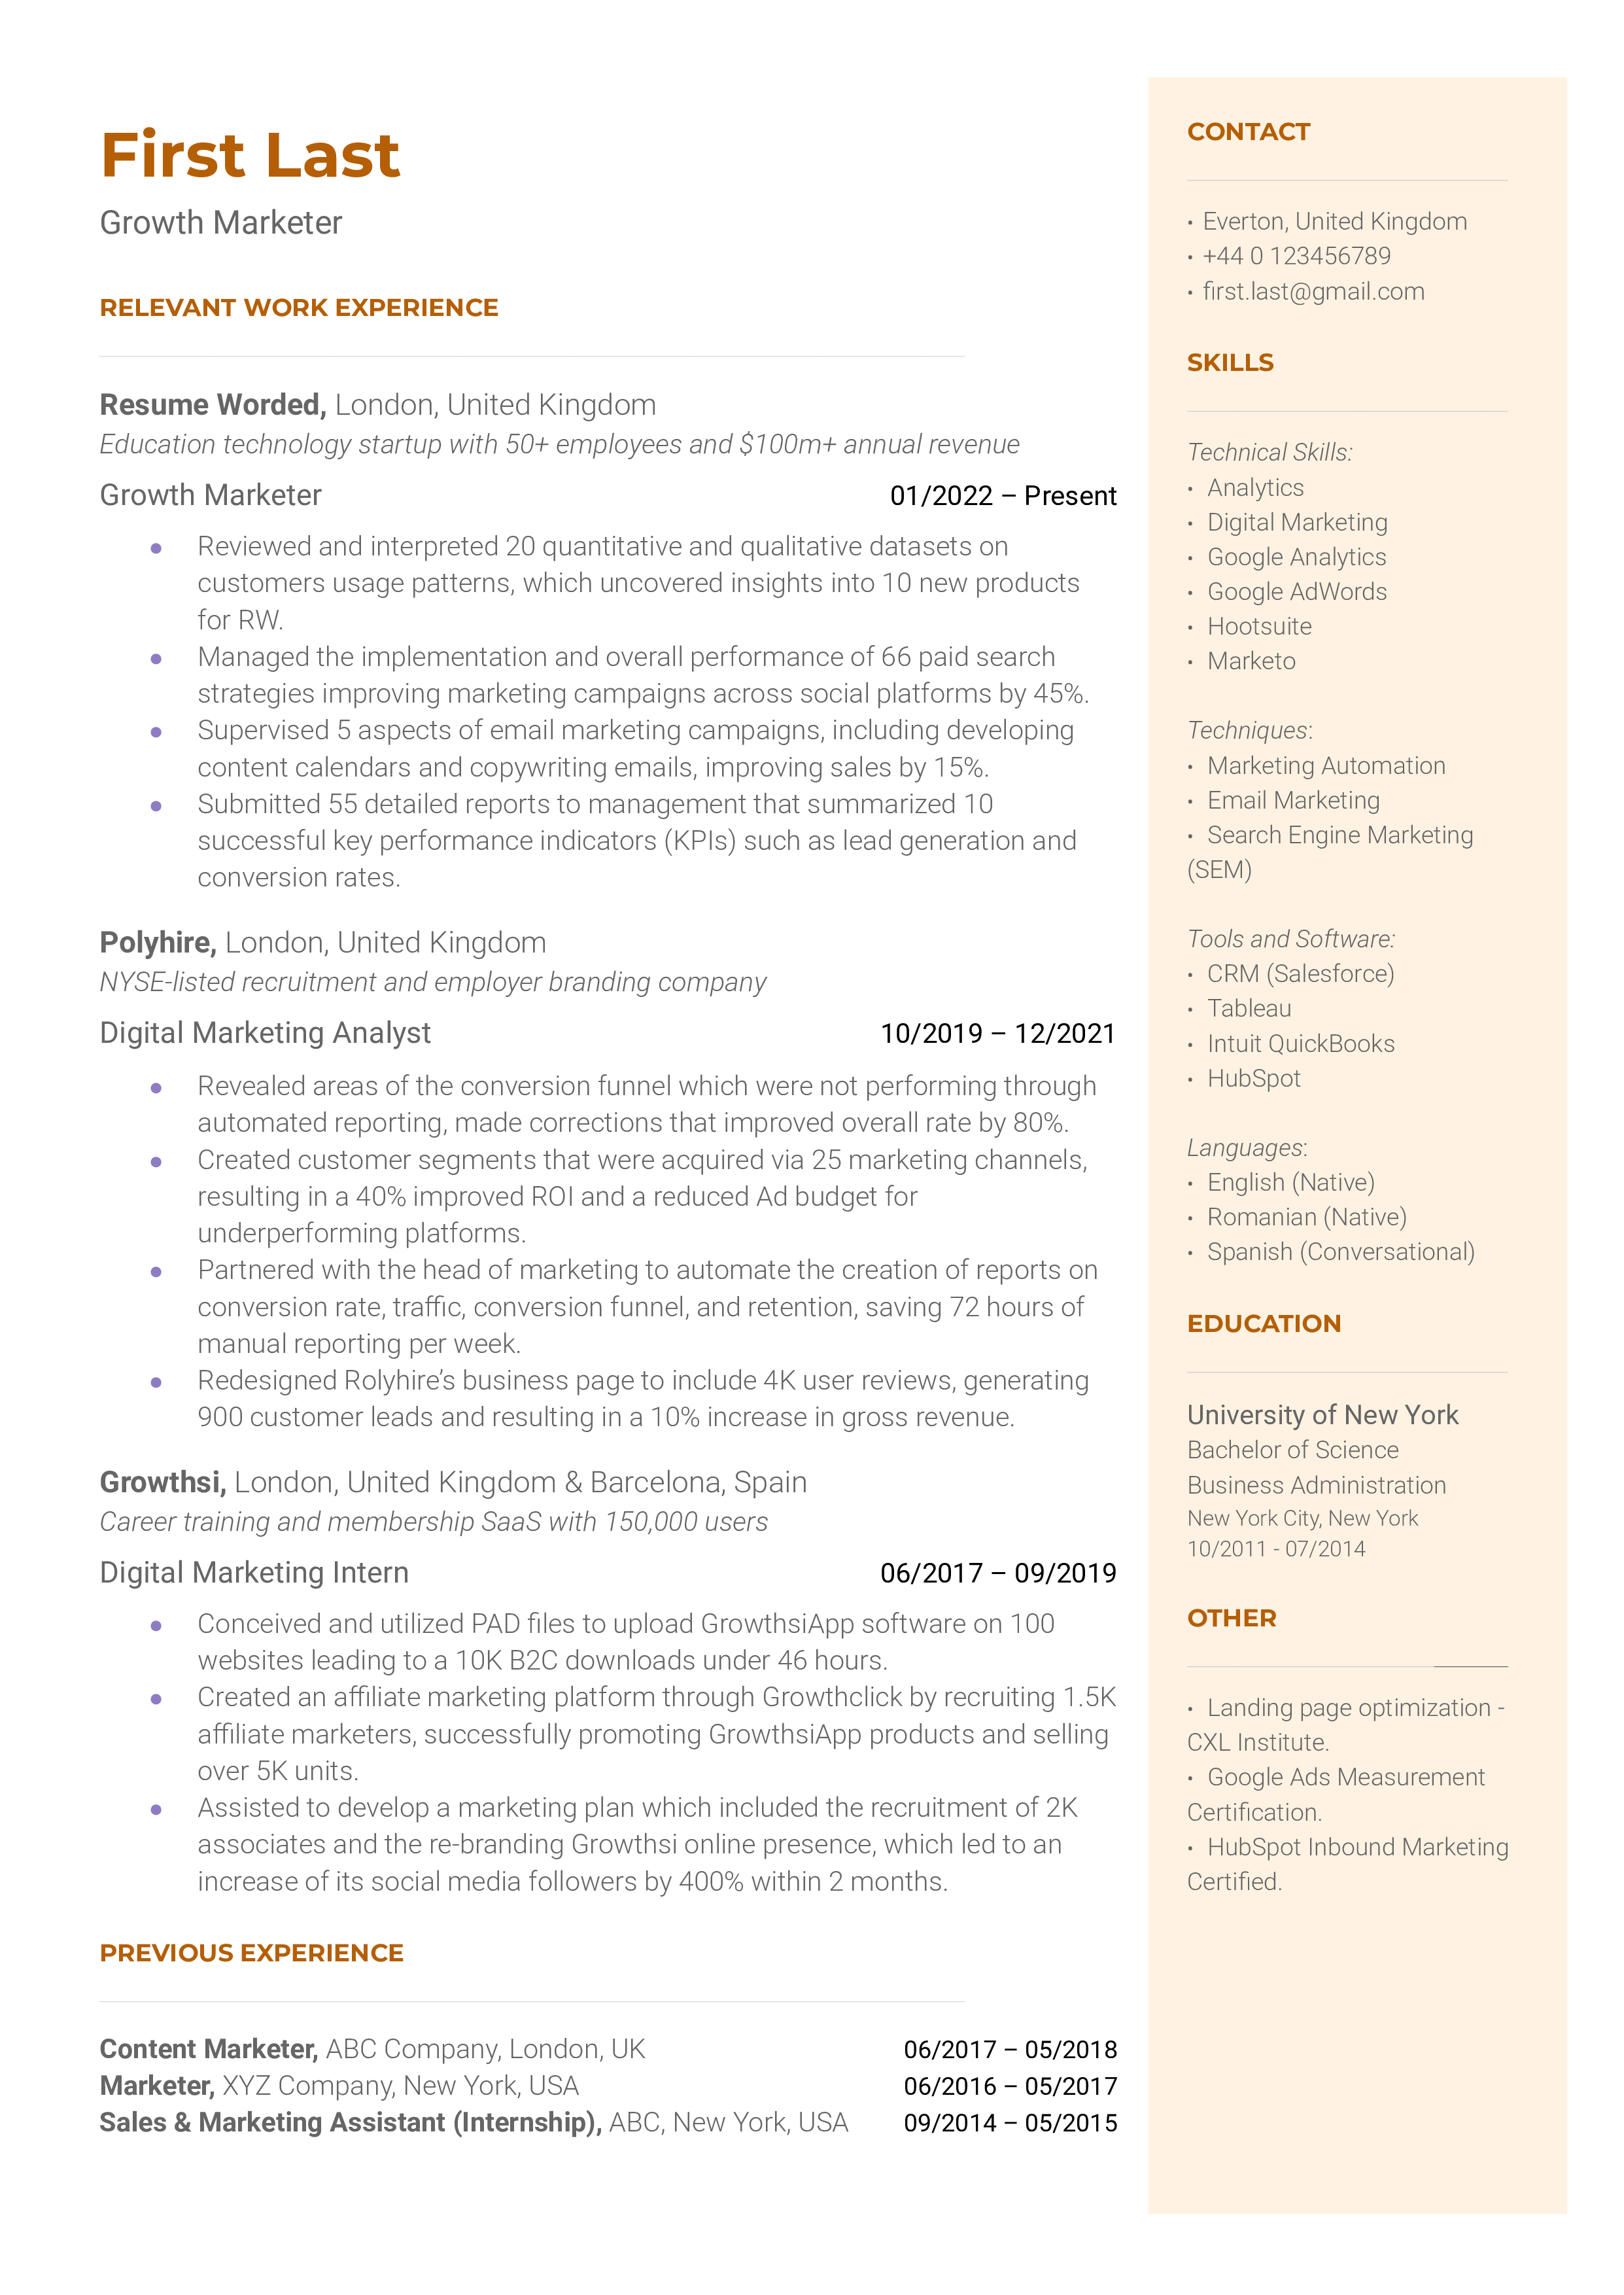 A CV for a Growth Marketer showcasing data analysis skills and experimentation abilities.